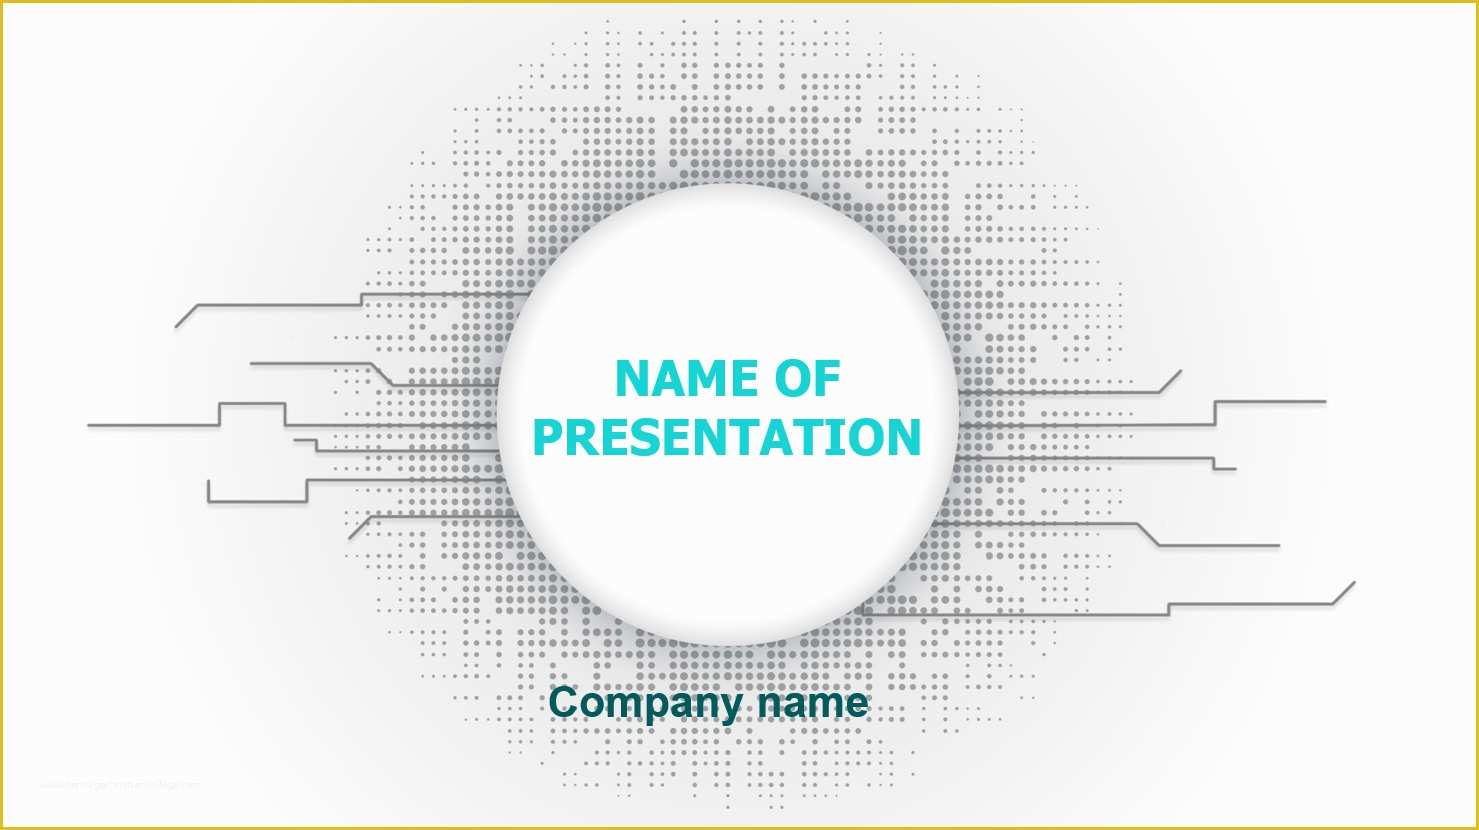 Ppt Templates for Technical Presentation Free Download Of Download Free Free Tech Powerpoint theme for Presentation